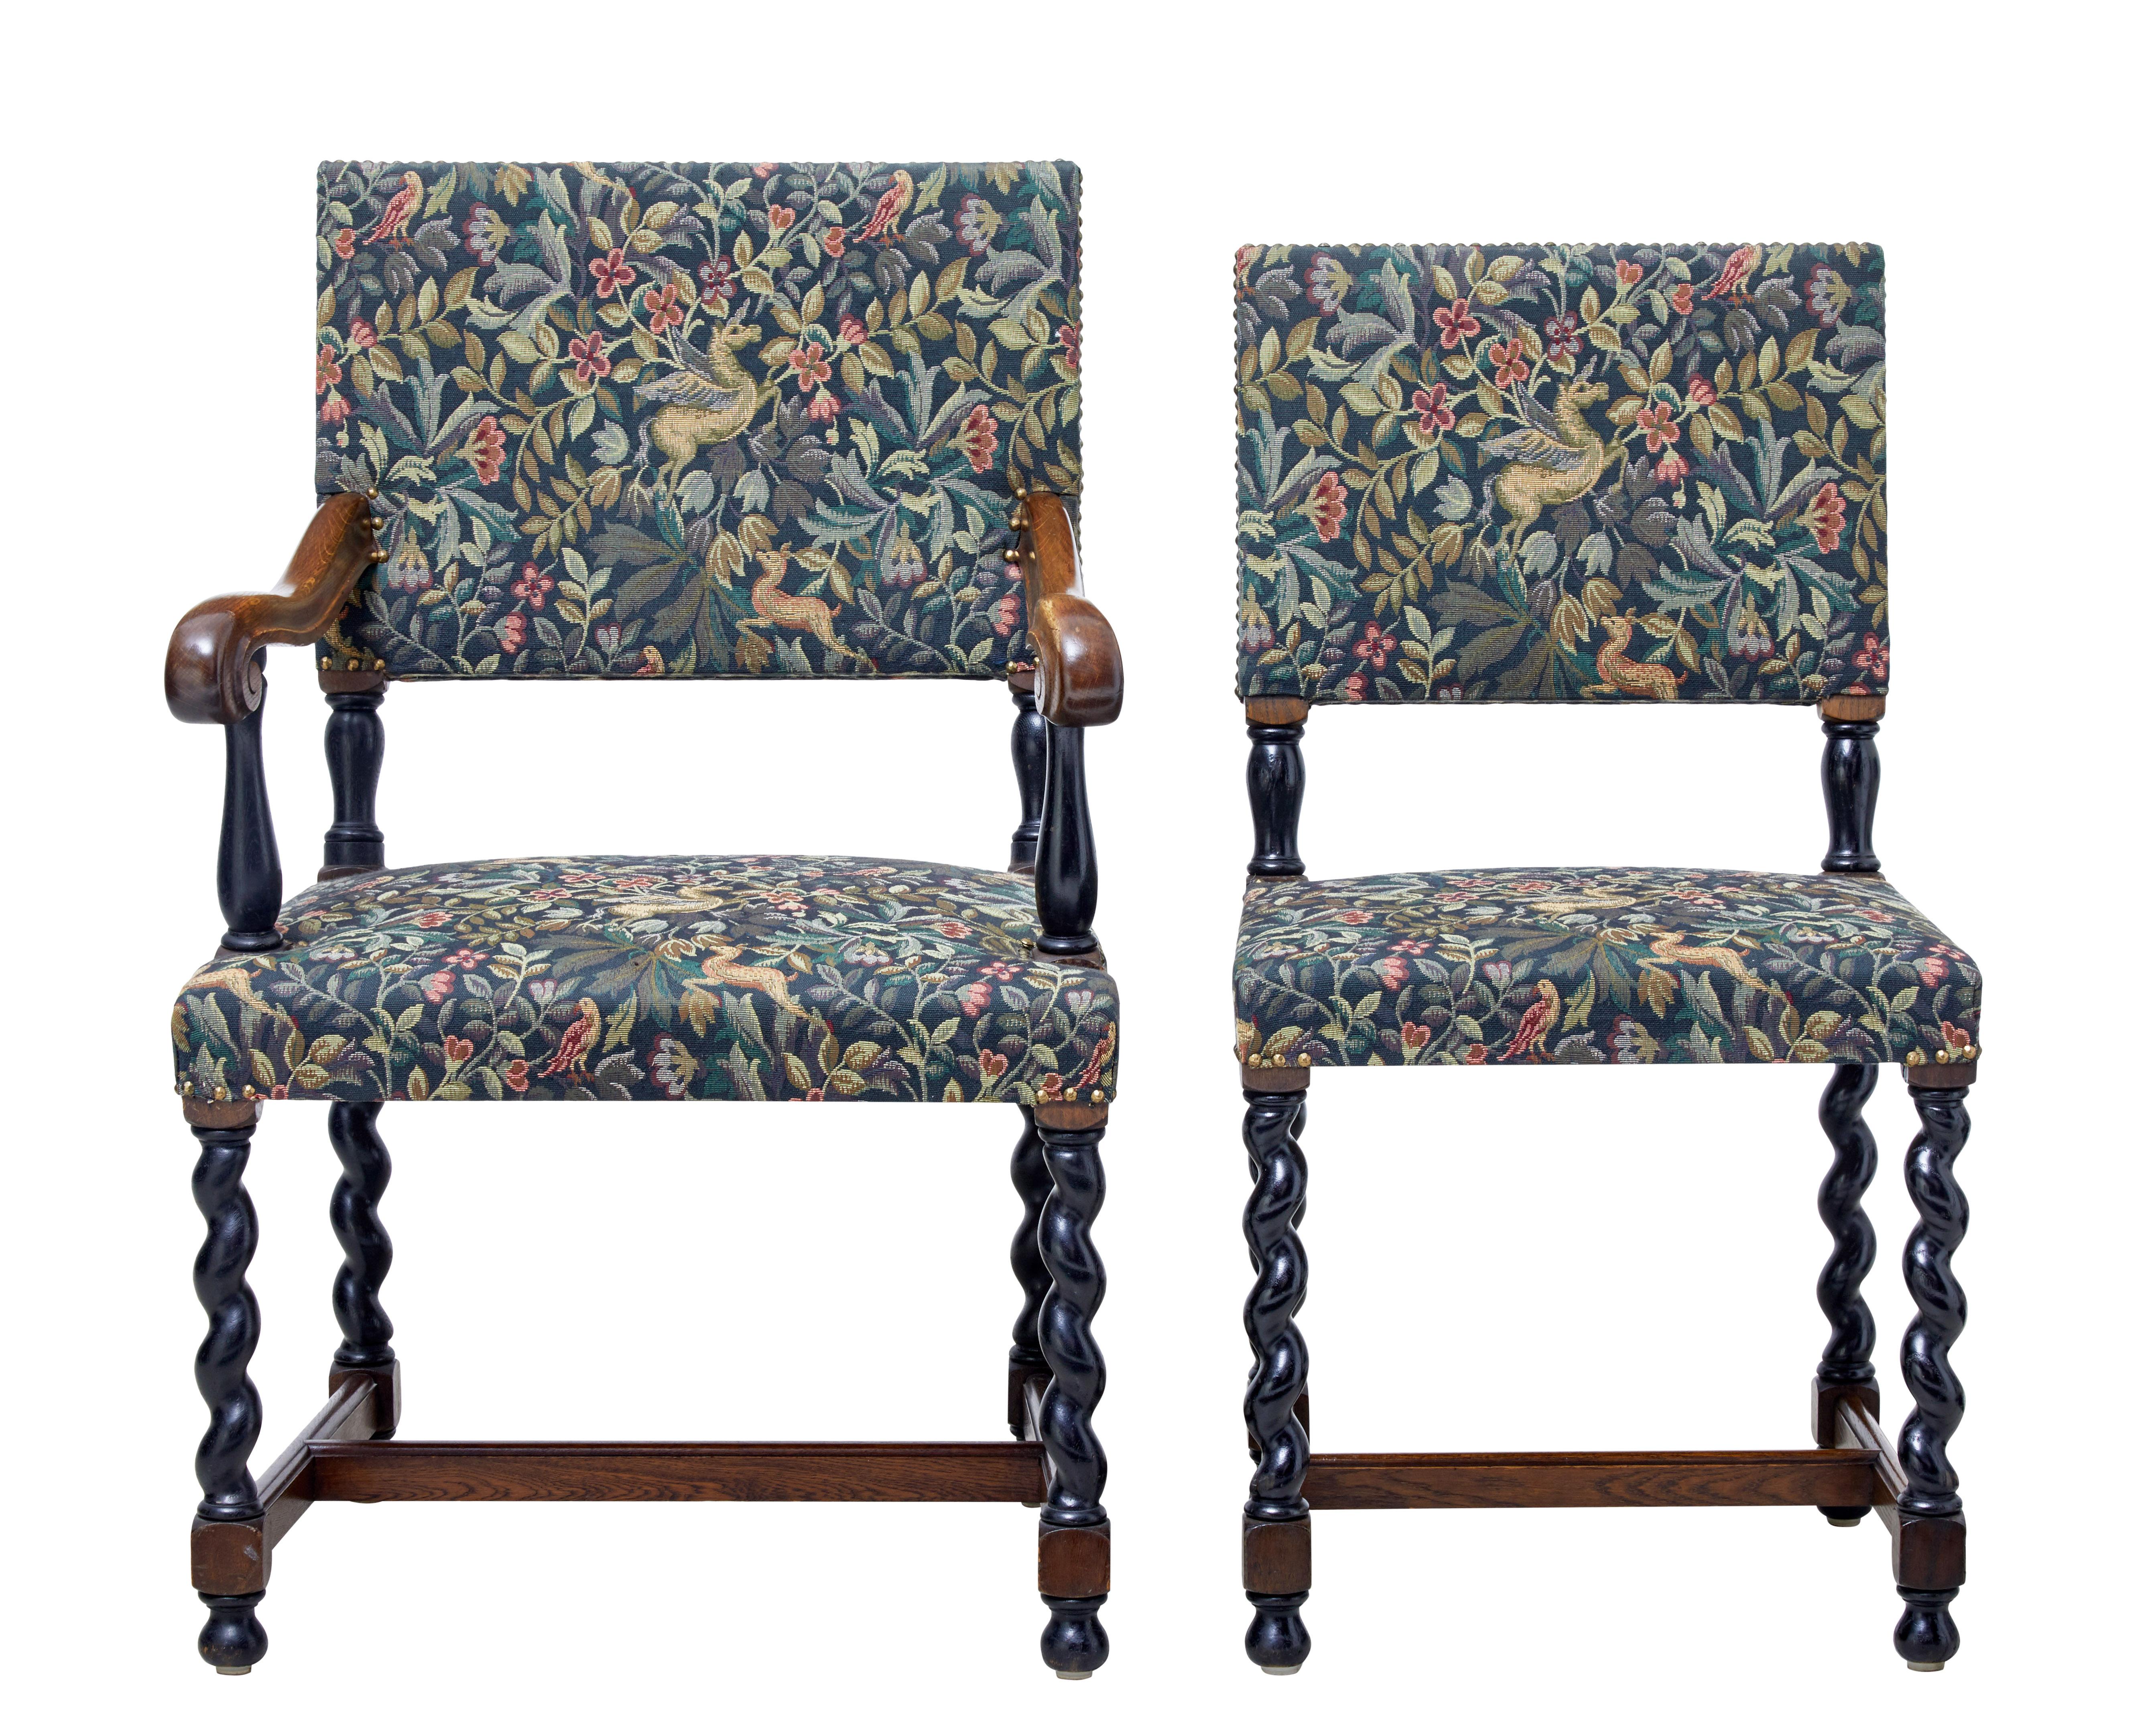 Good quality set of six single and two carver dining chairs circa 1890.

Recently upholstered in a William Morris style fabric and stud work.

Armchairs with scrolled arms, ebonized supports and barley twist legs. United by an 'h' frame